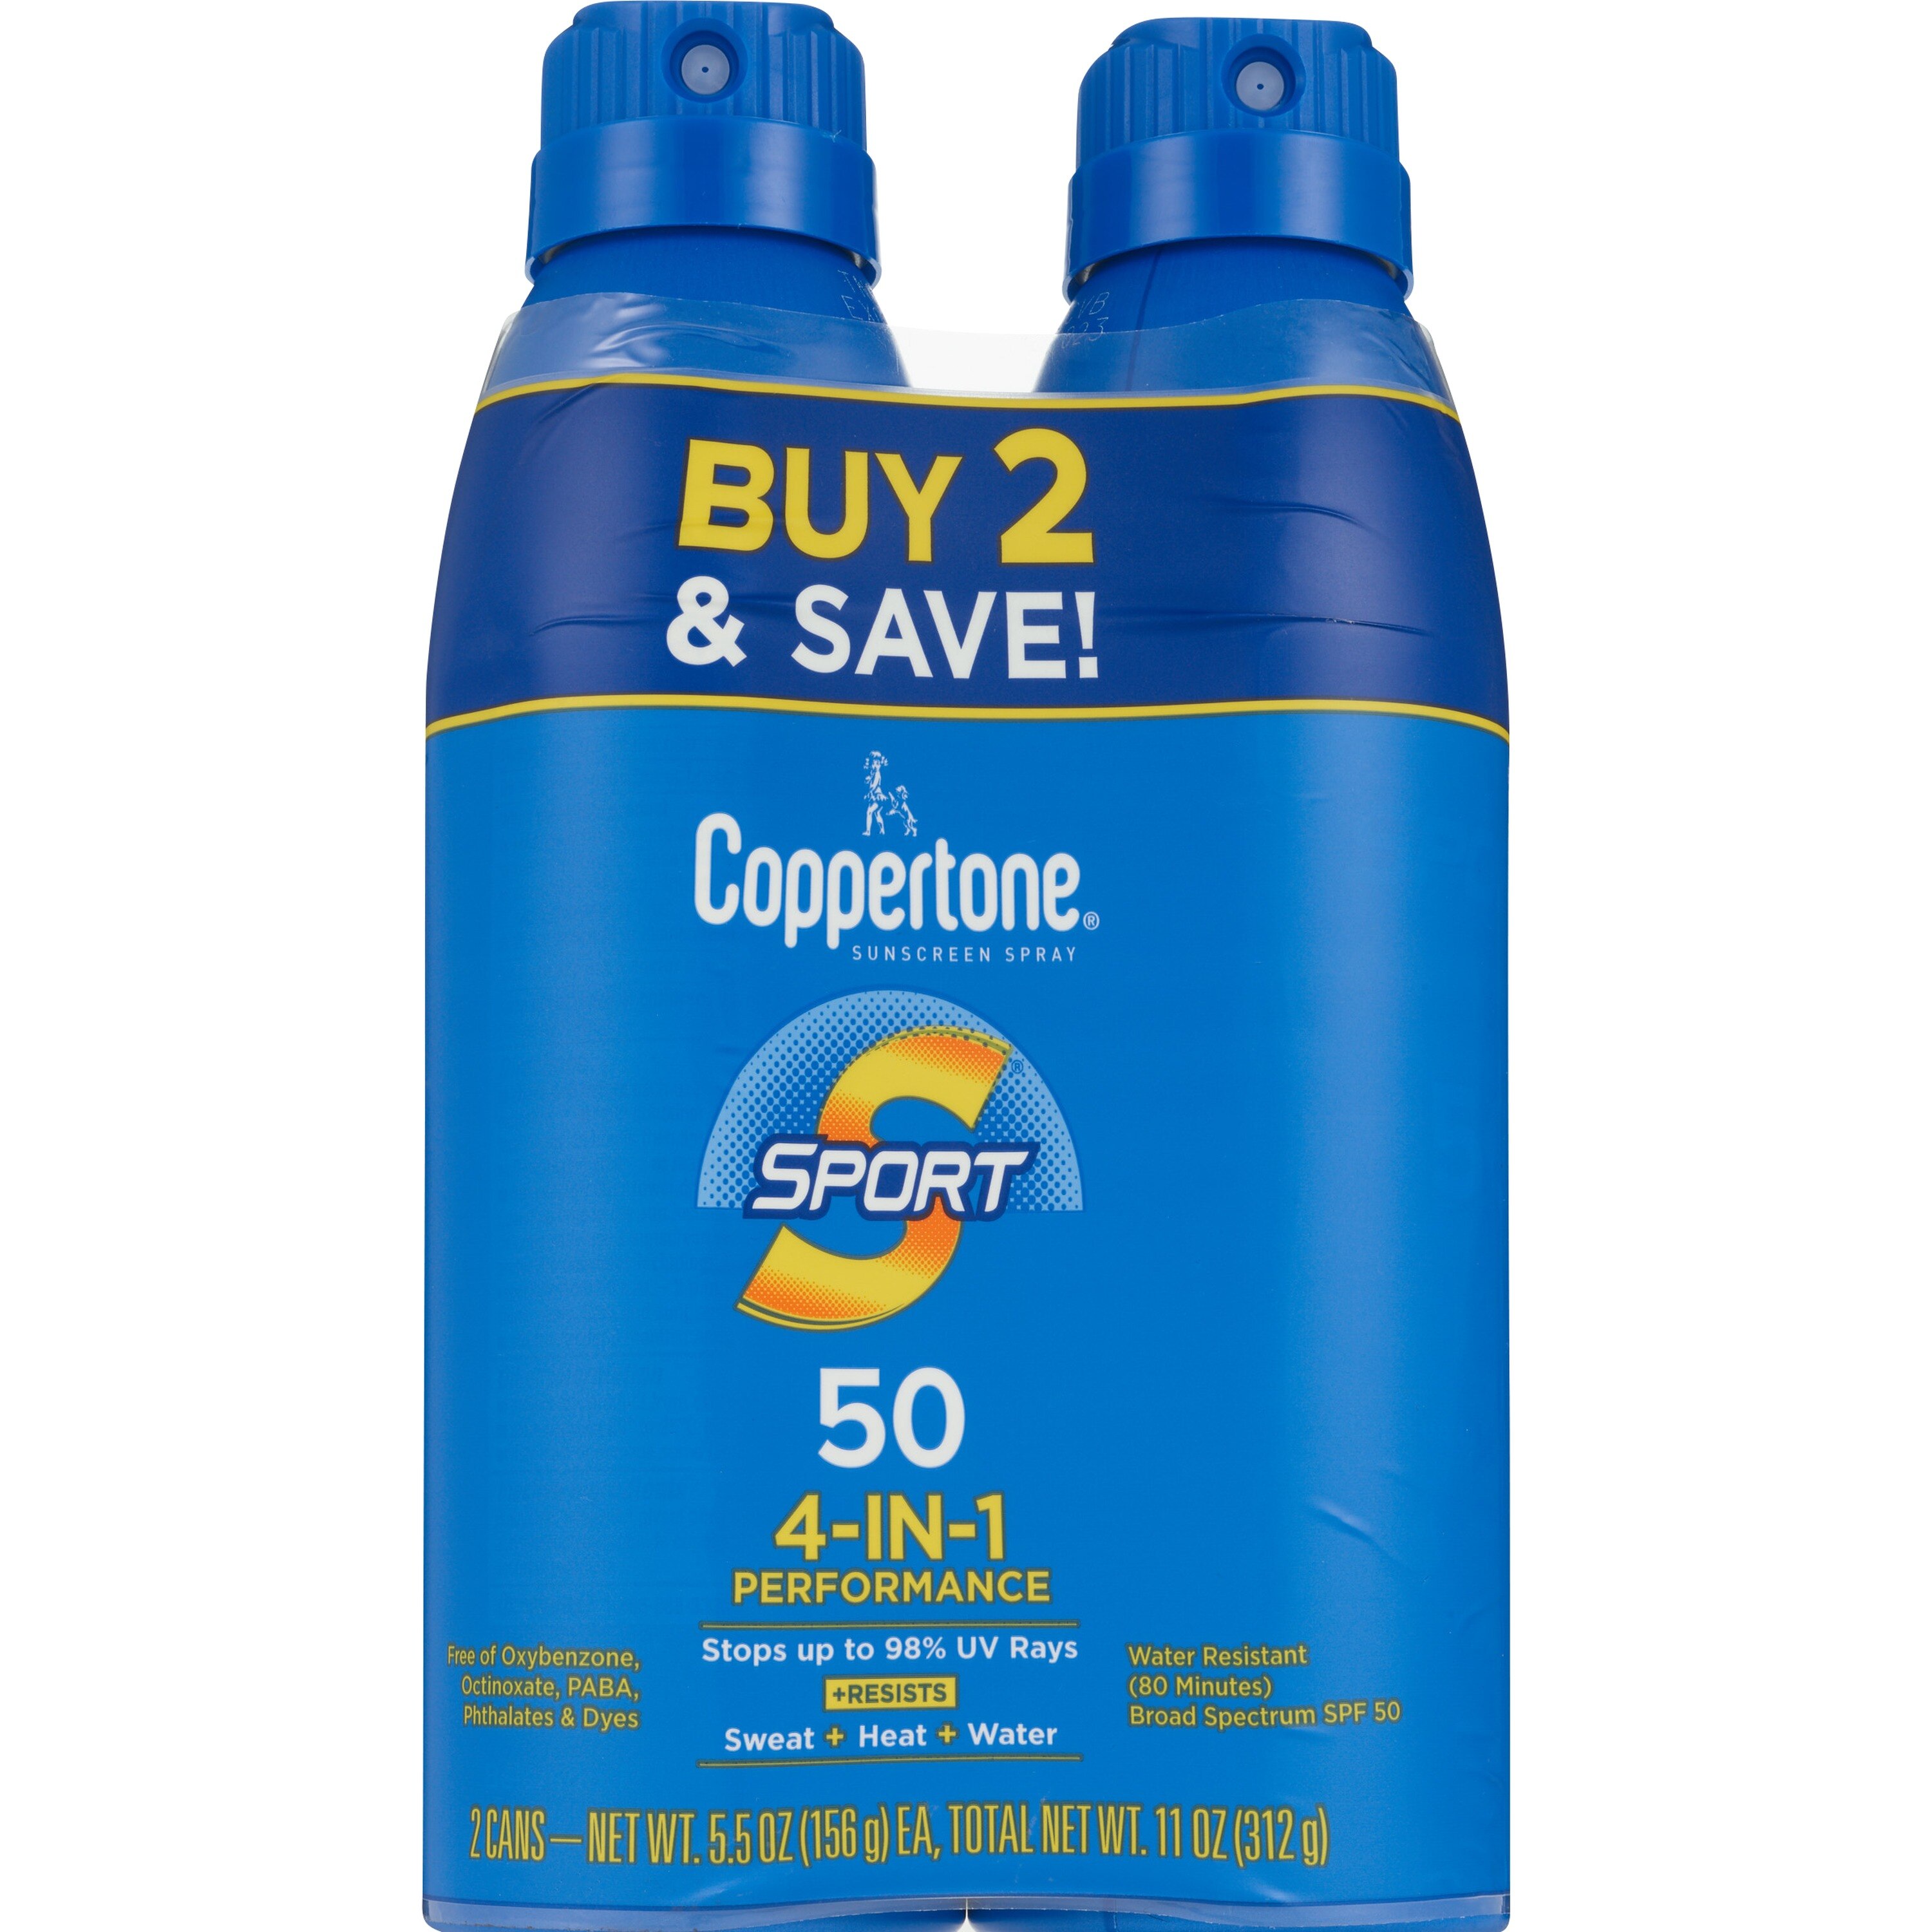 Coppertone SPORT Continuous Sunscreen Spray Broad Spectrum SPF 30, Twin Pack, 5.5 OZ